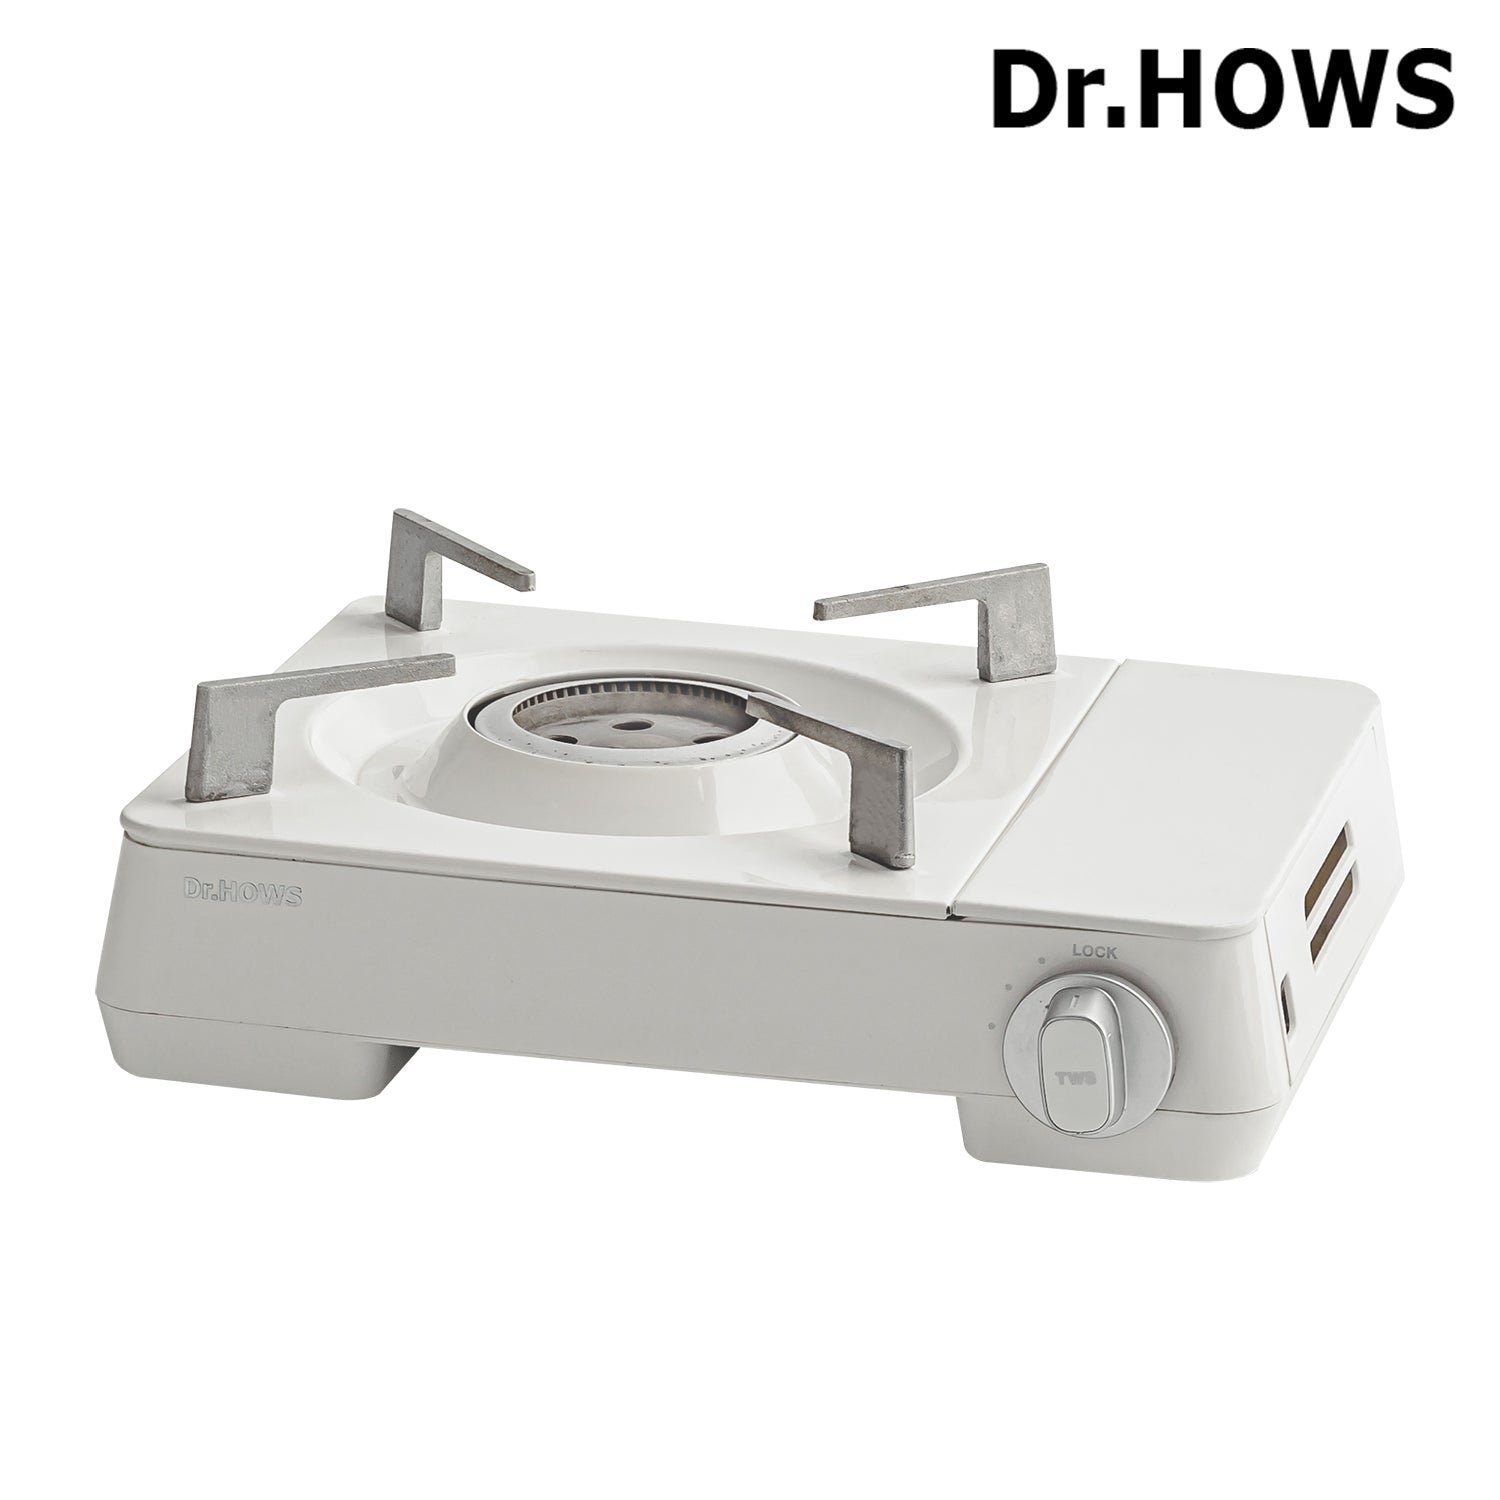 Dr. Hows Twinkle Stove